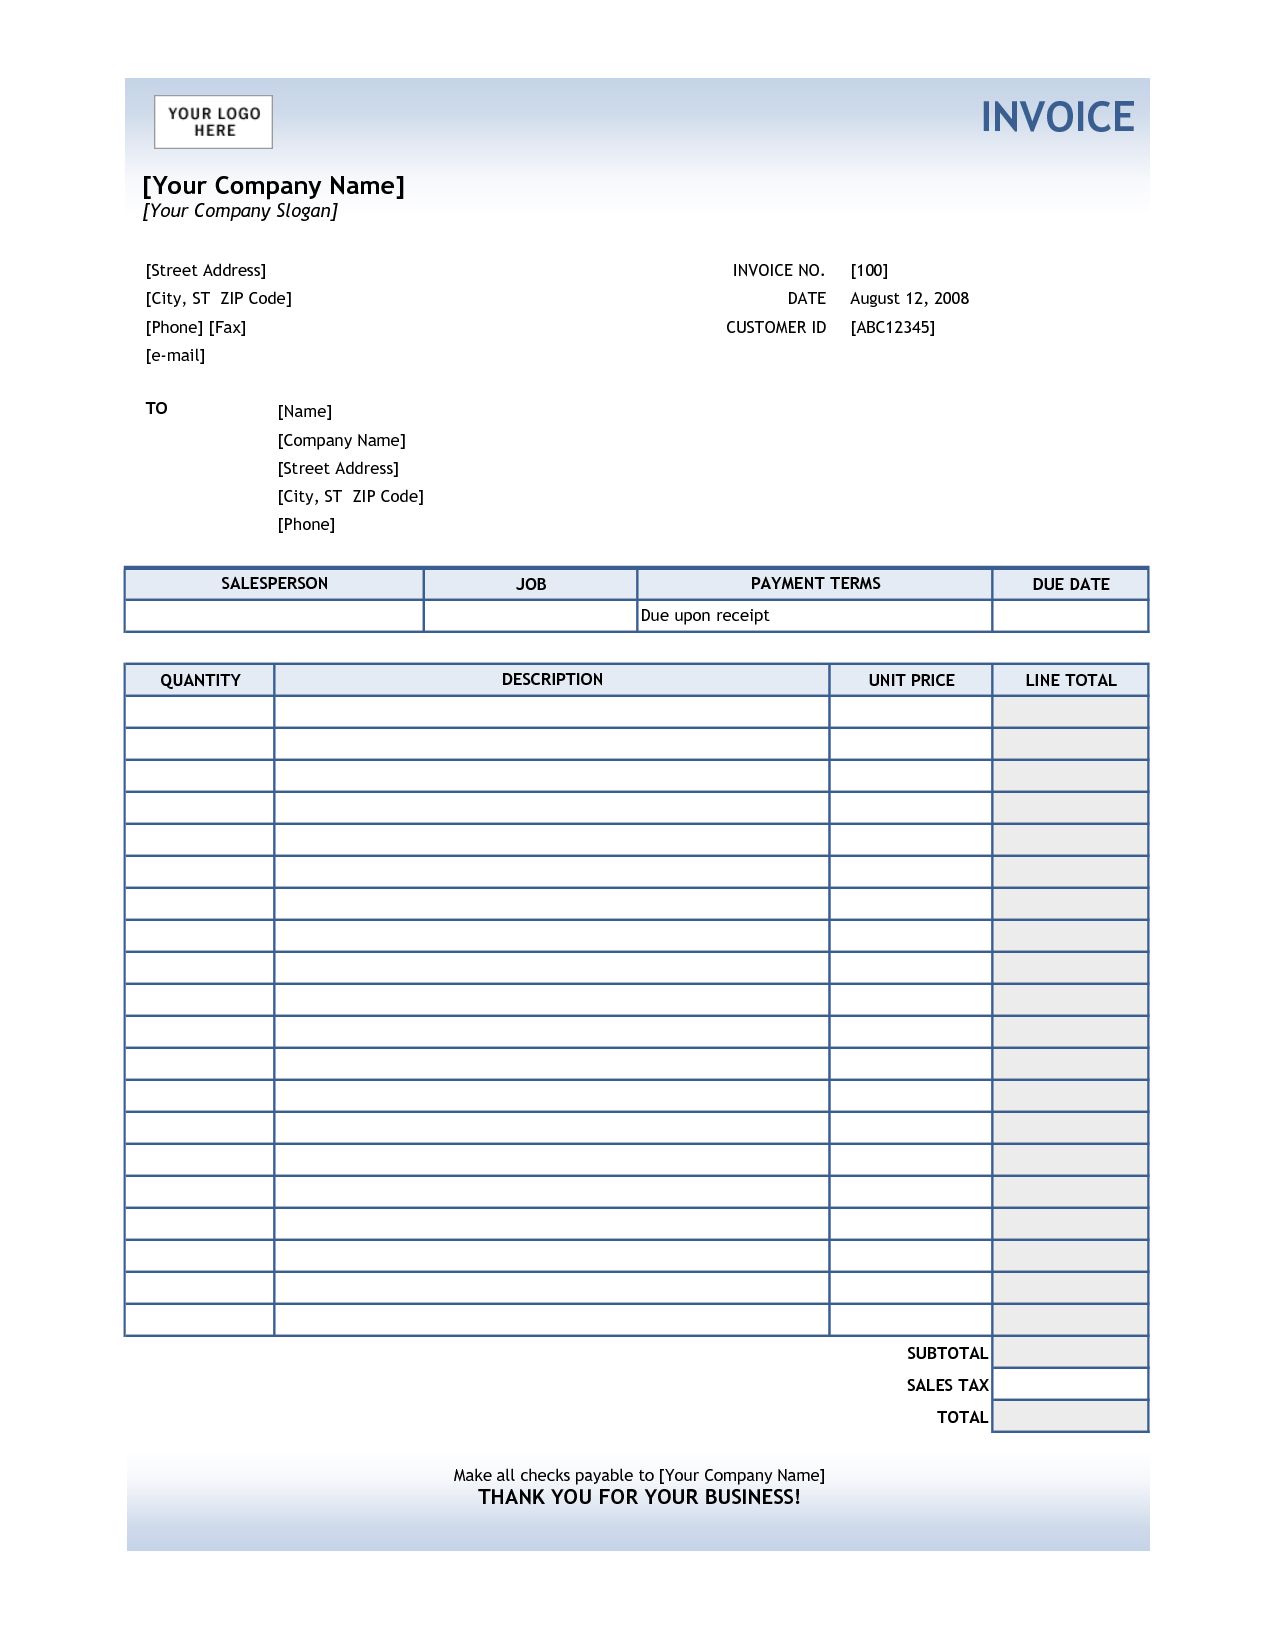 Blank Invoice Template Excel Free Excel Templates